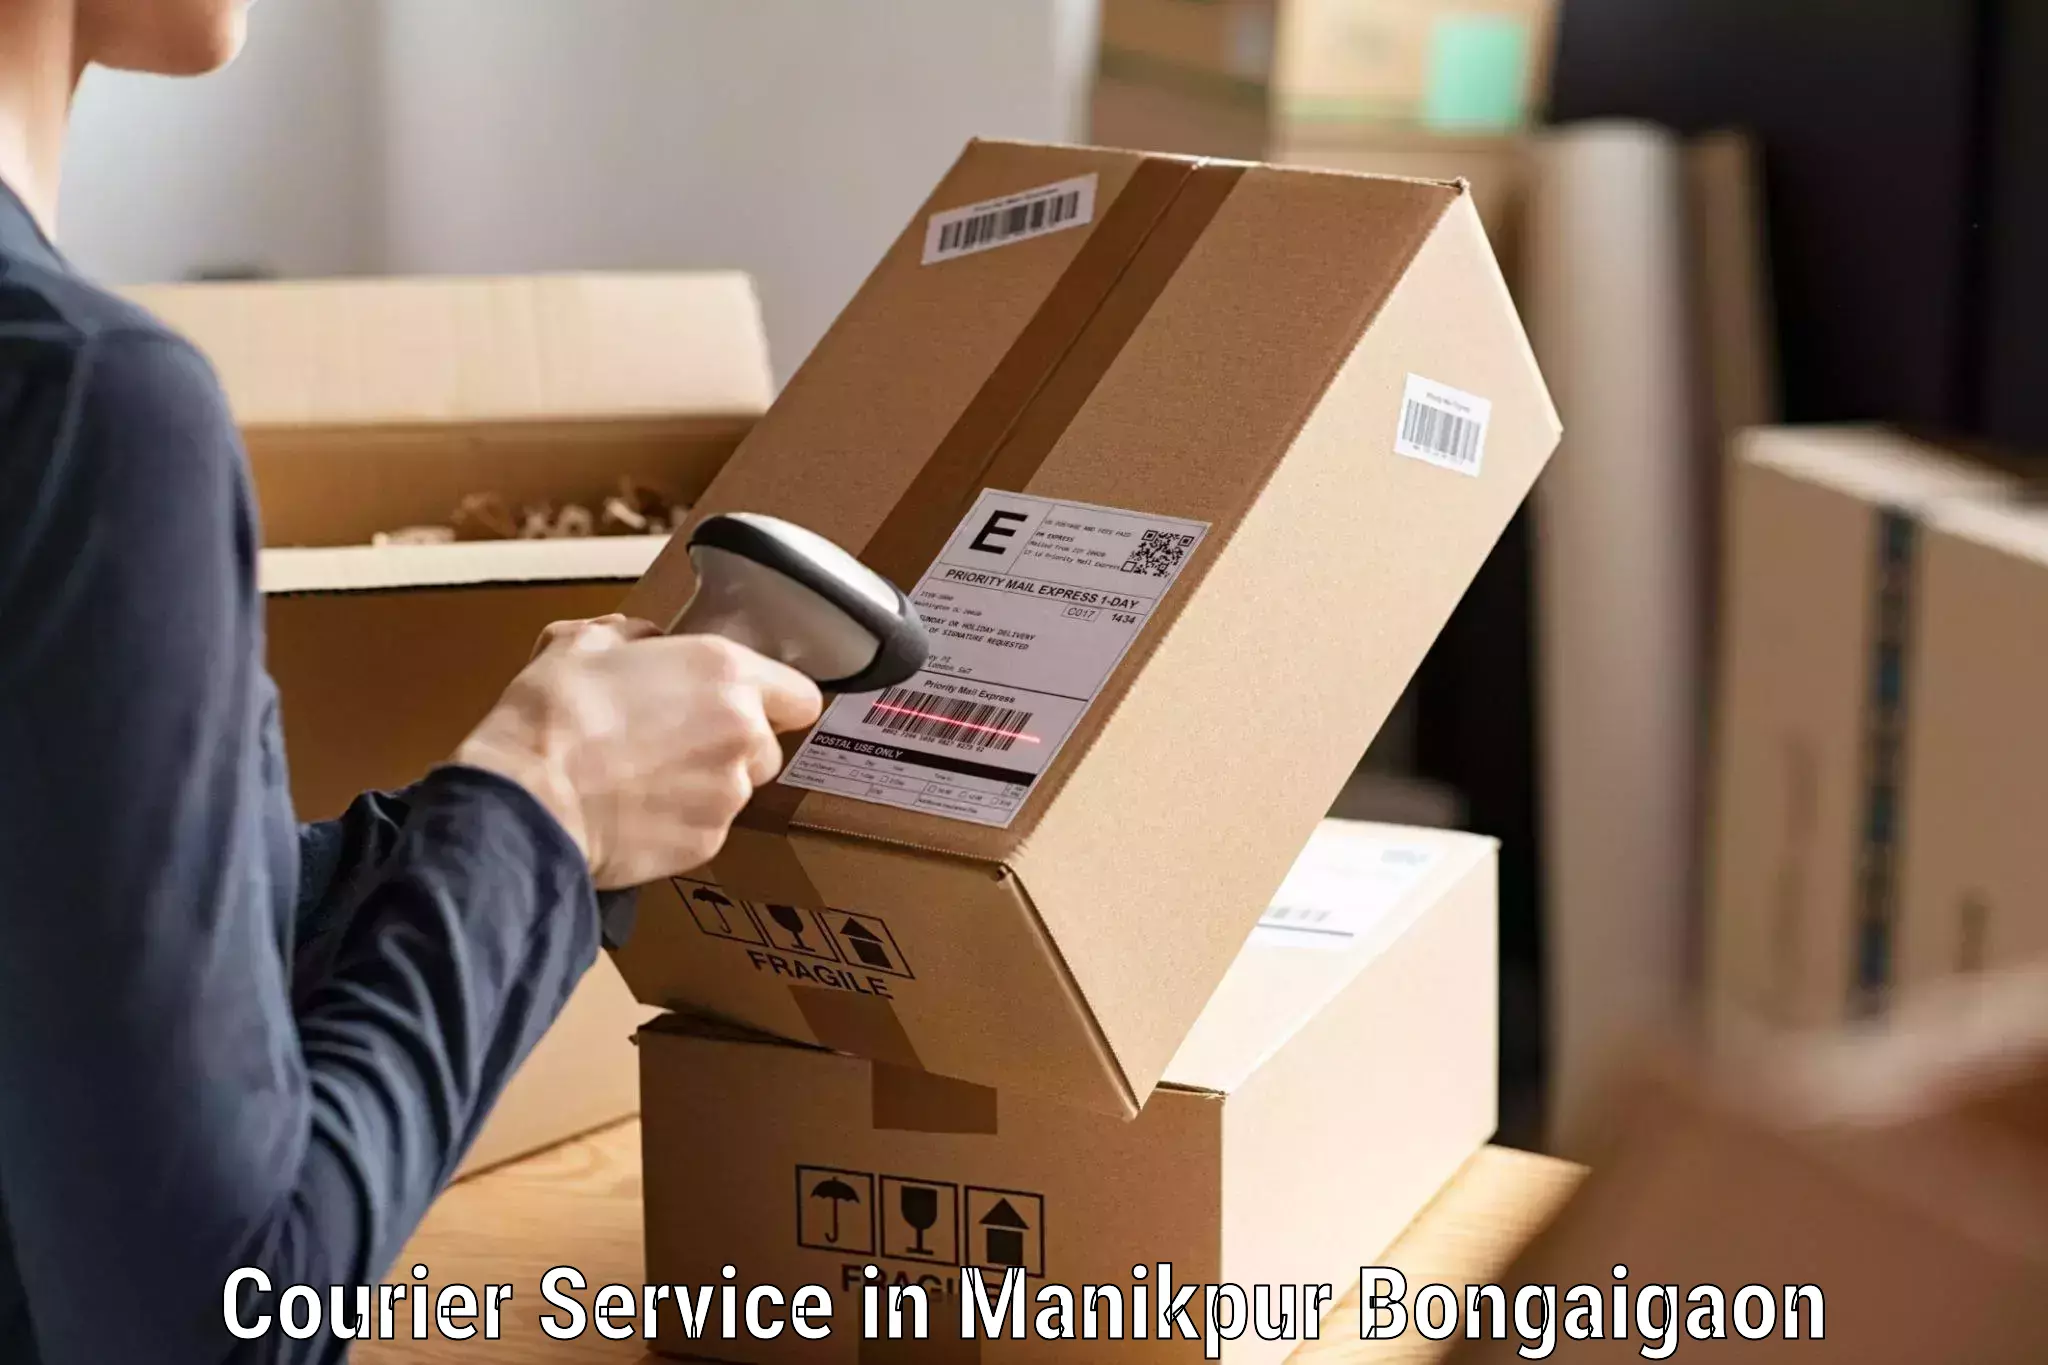 Large-scale shipping solutions in Manikpur Bongaigaon